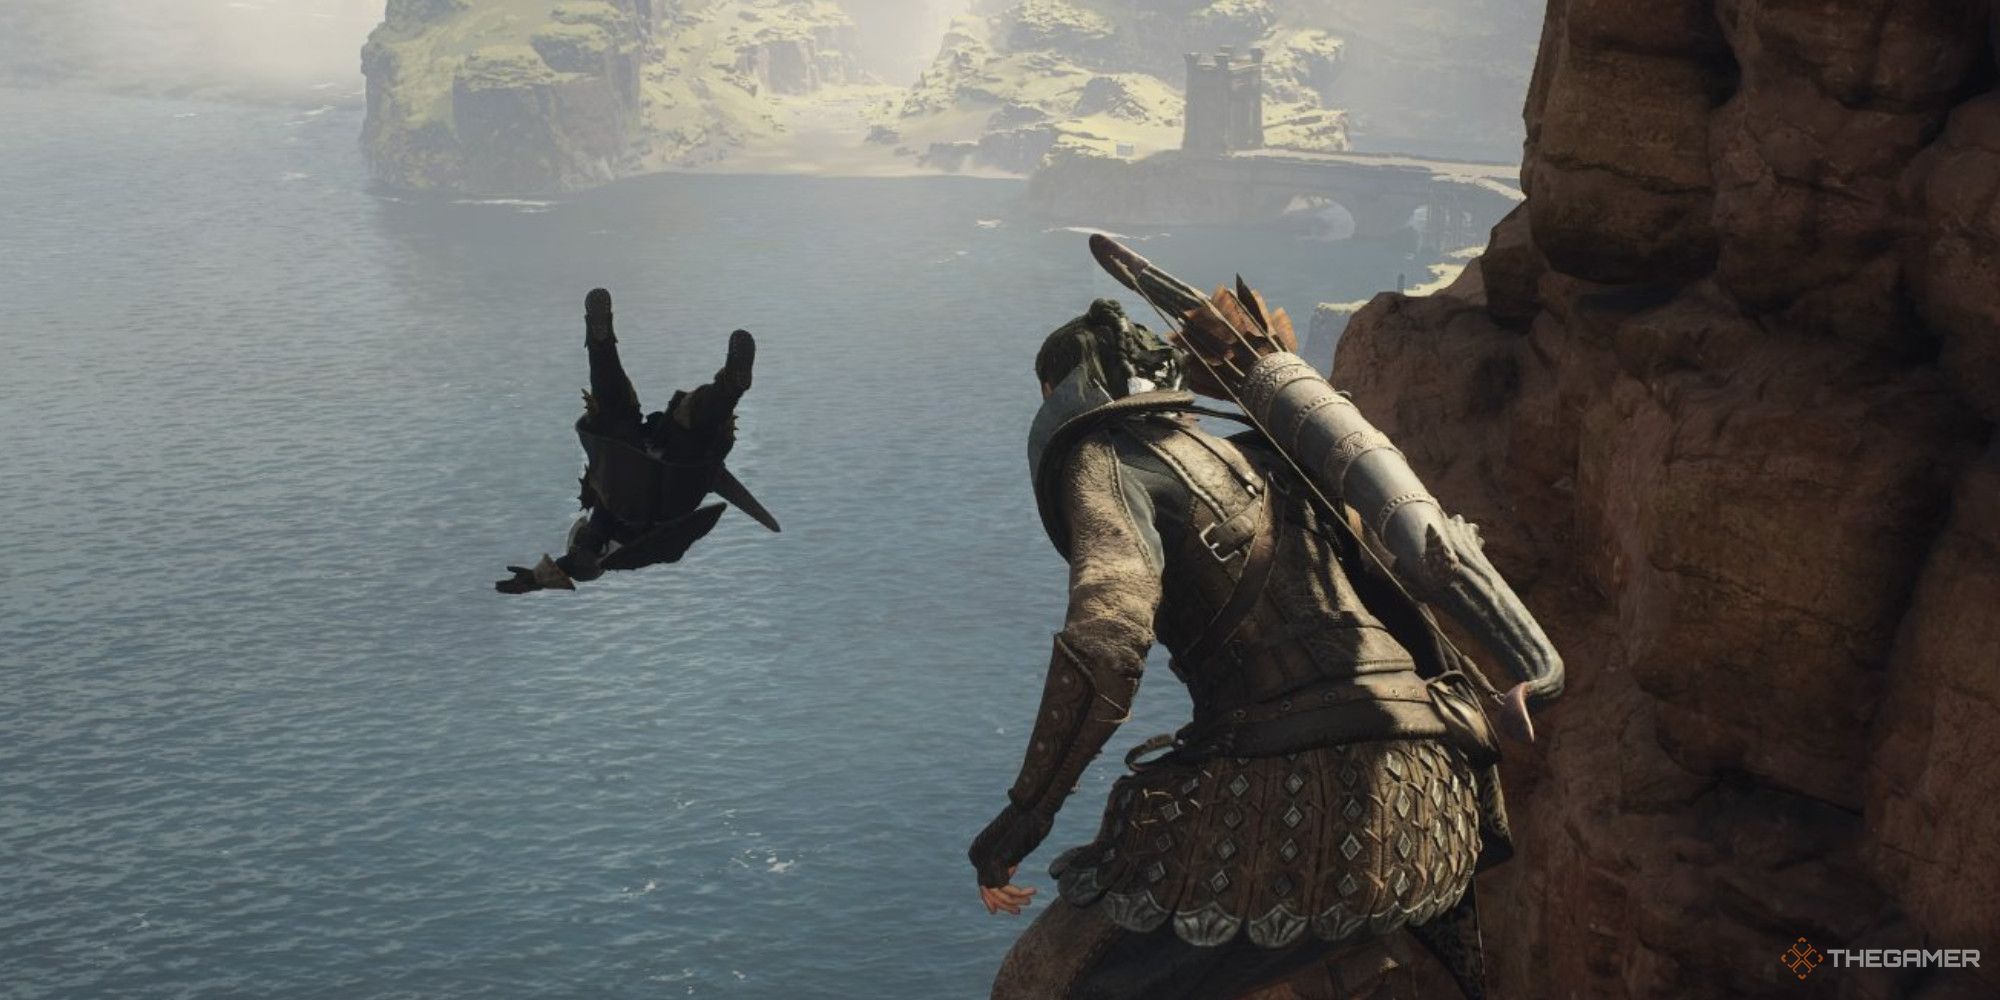 Dragon's Dogma 2 main character throwing an armored woman off a cliff and into the ocean